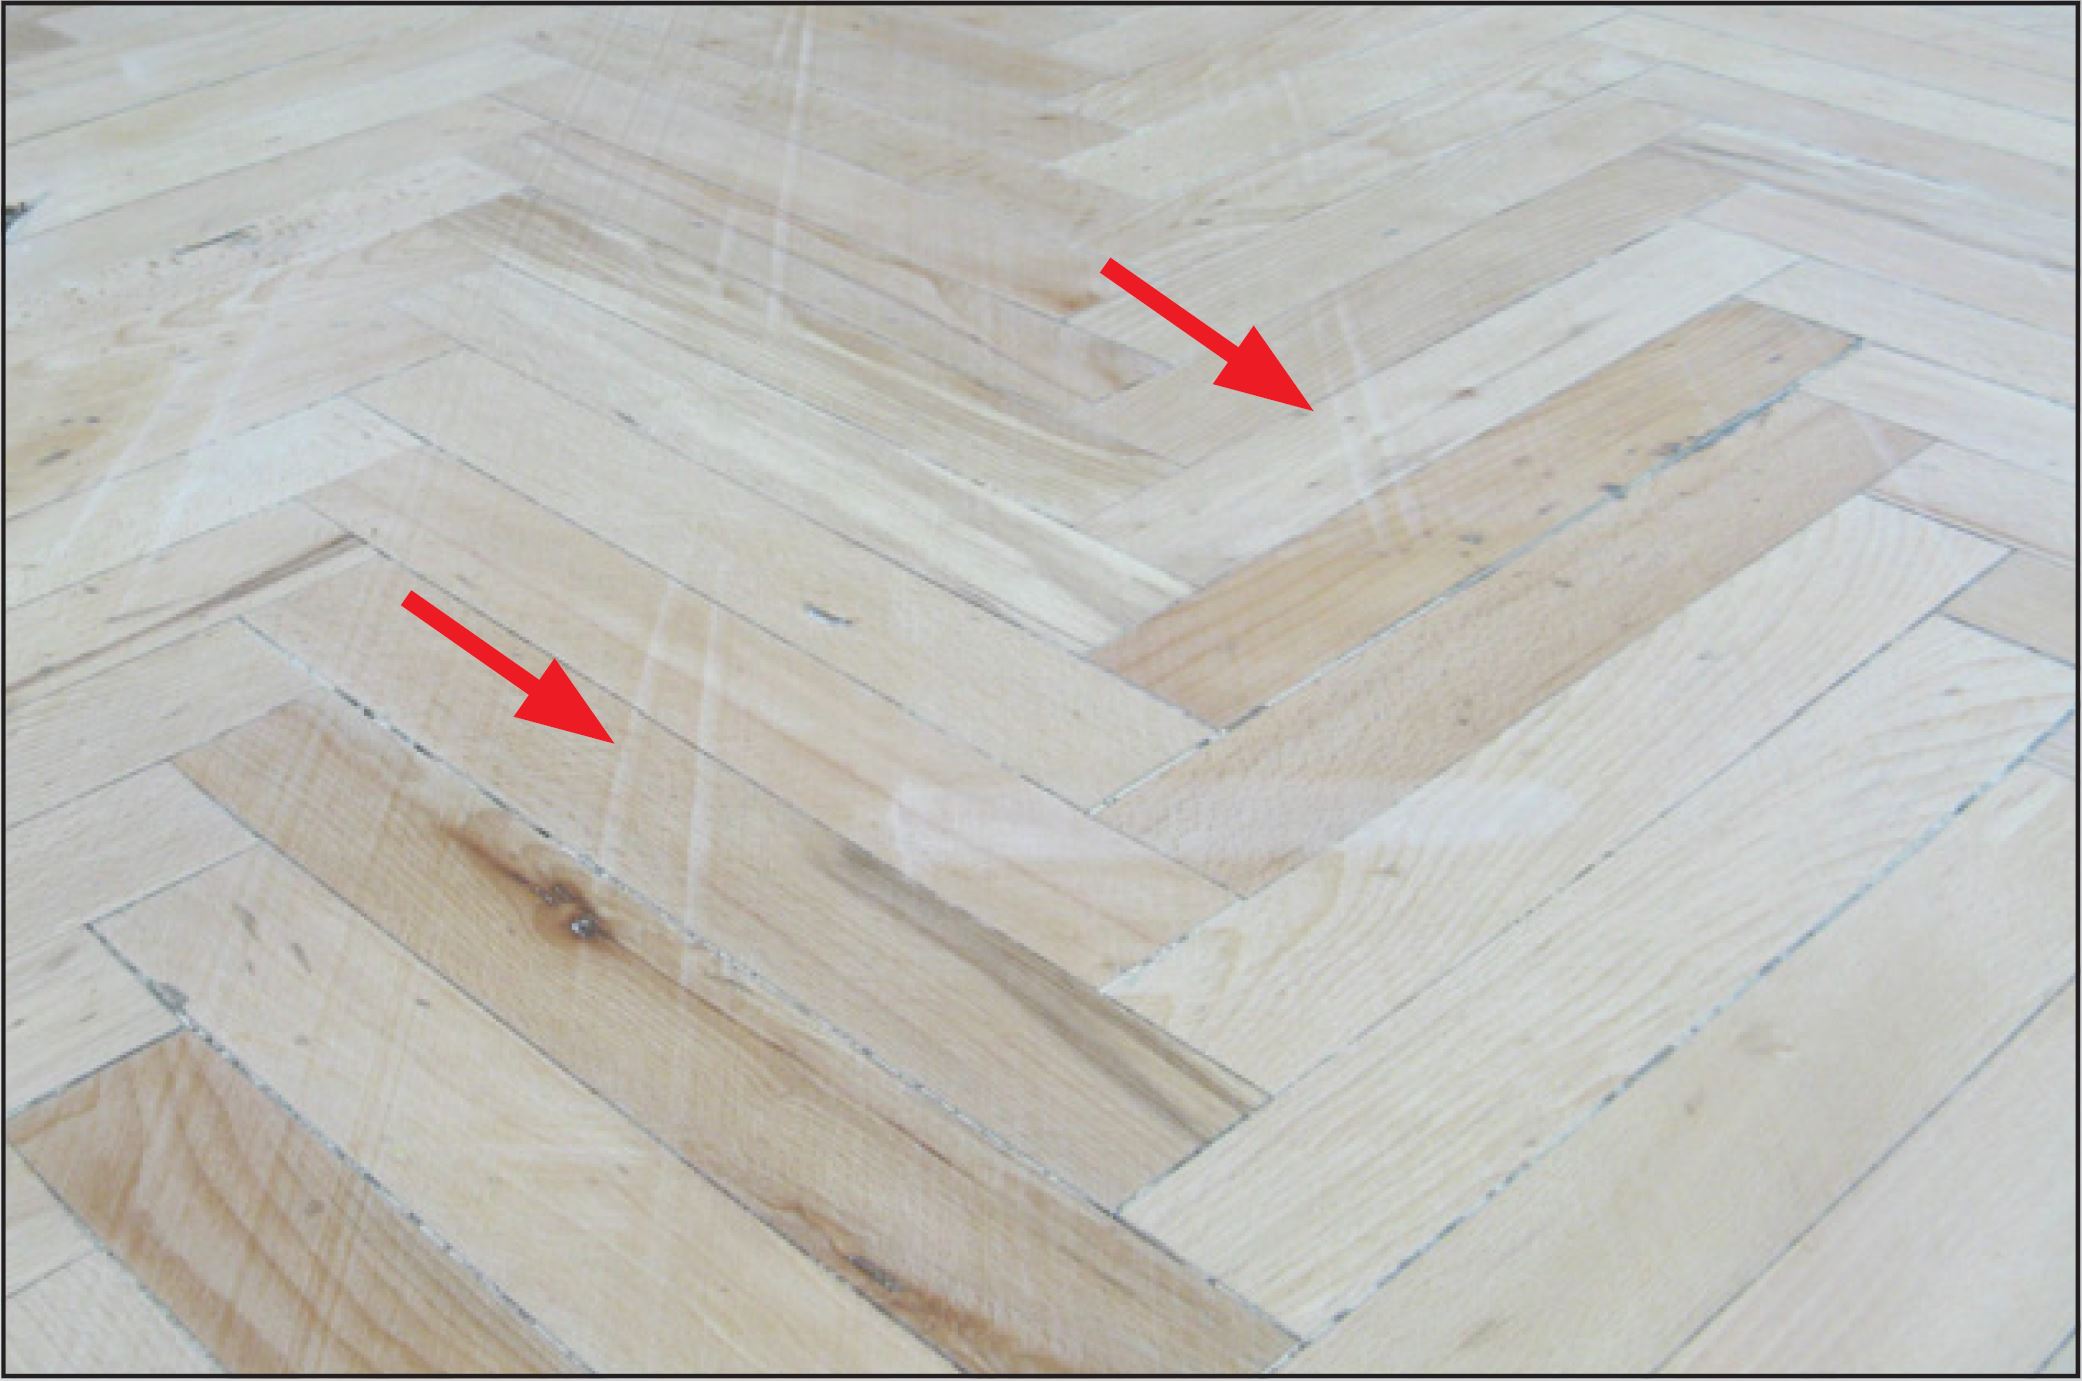 Gouges Cut in a Wood Floor by a Damaged Sanding Drum